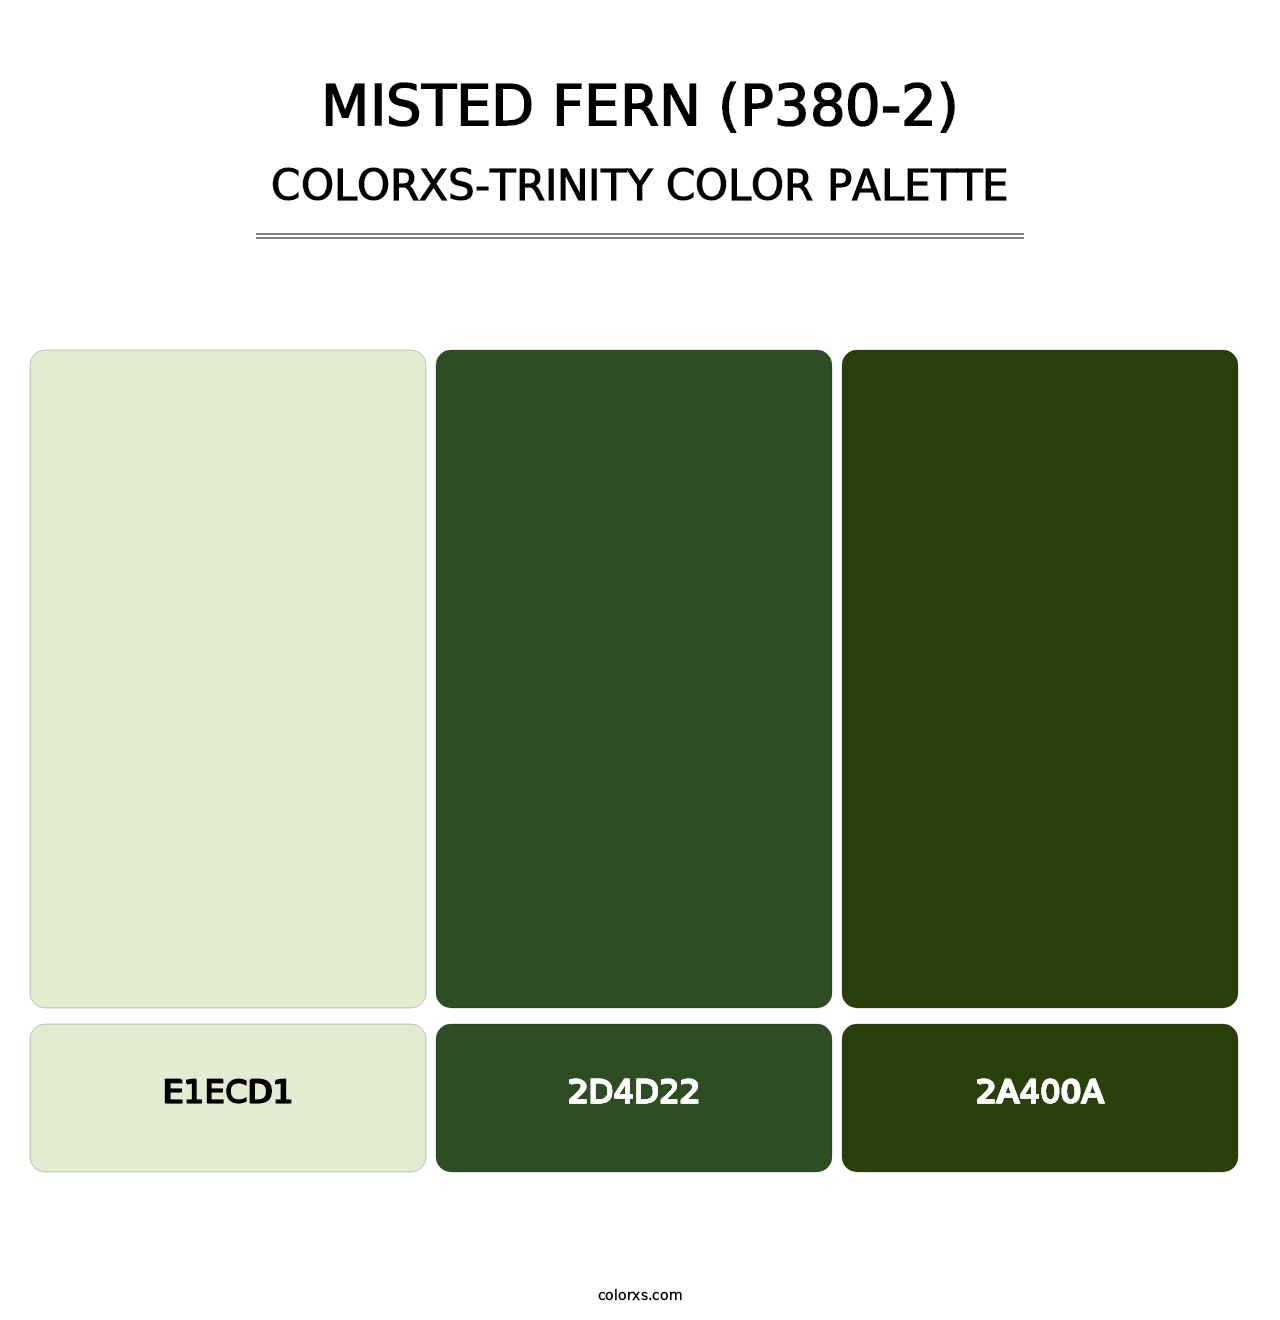 Misted Fern (P380-2) - Colorxs Trinity Palette